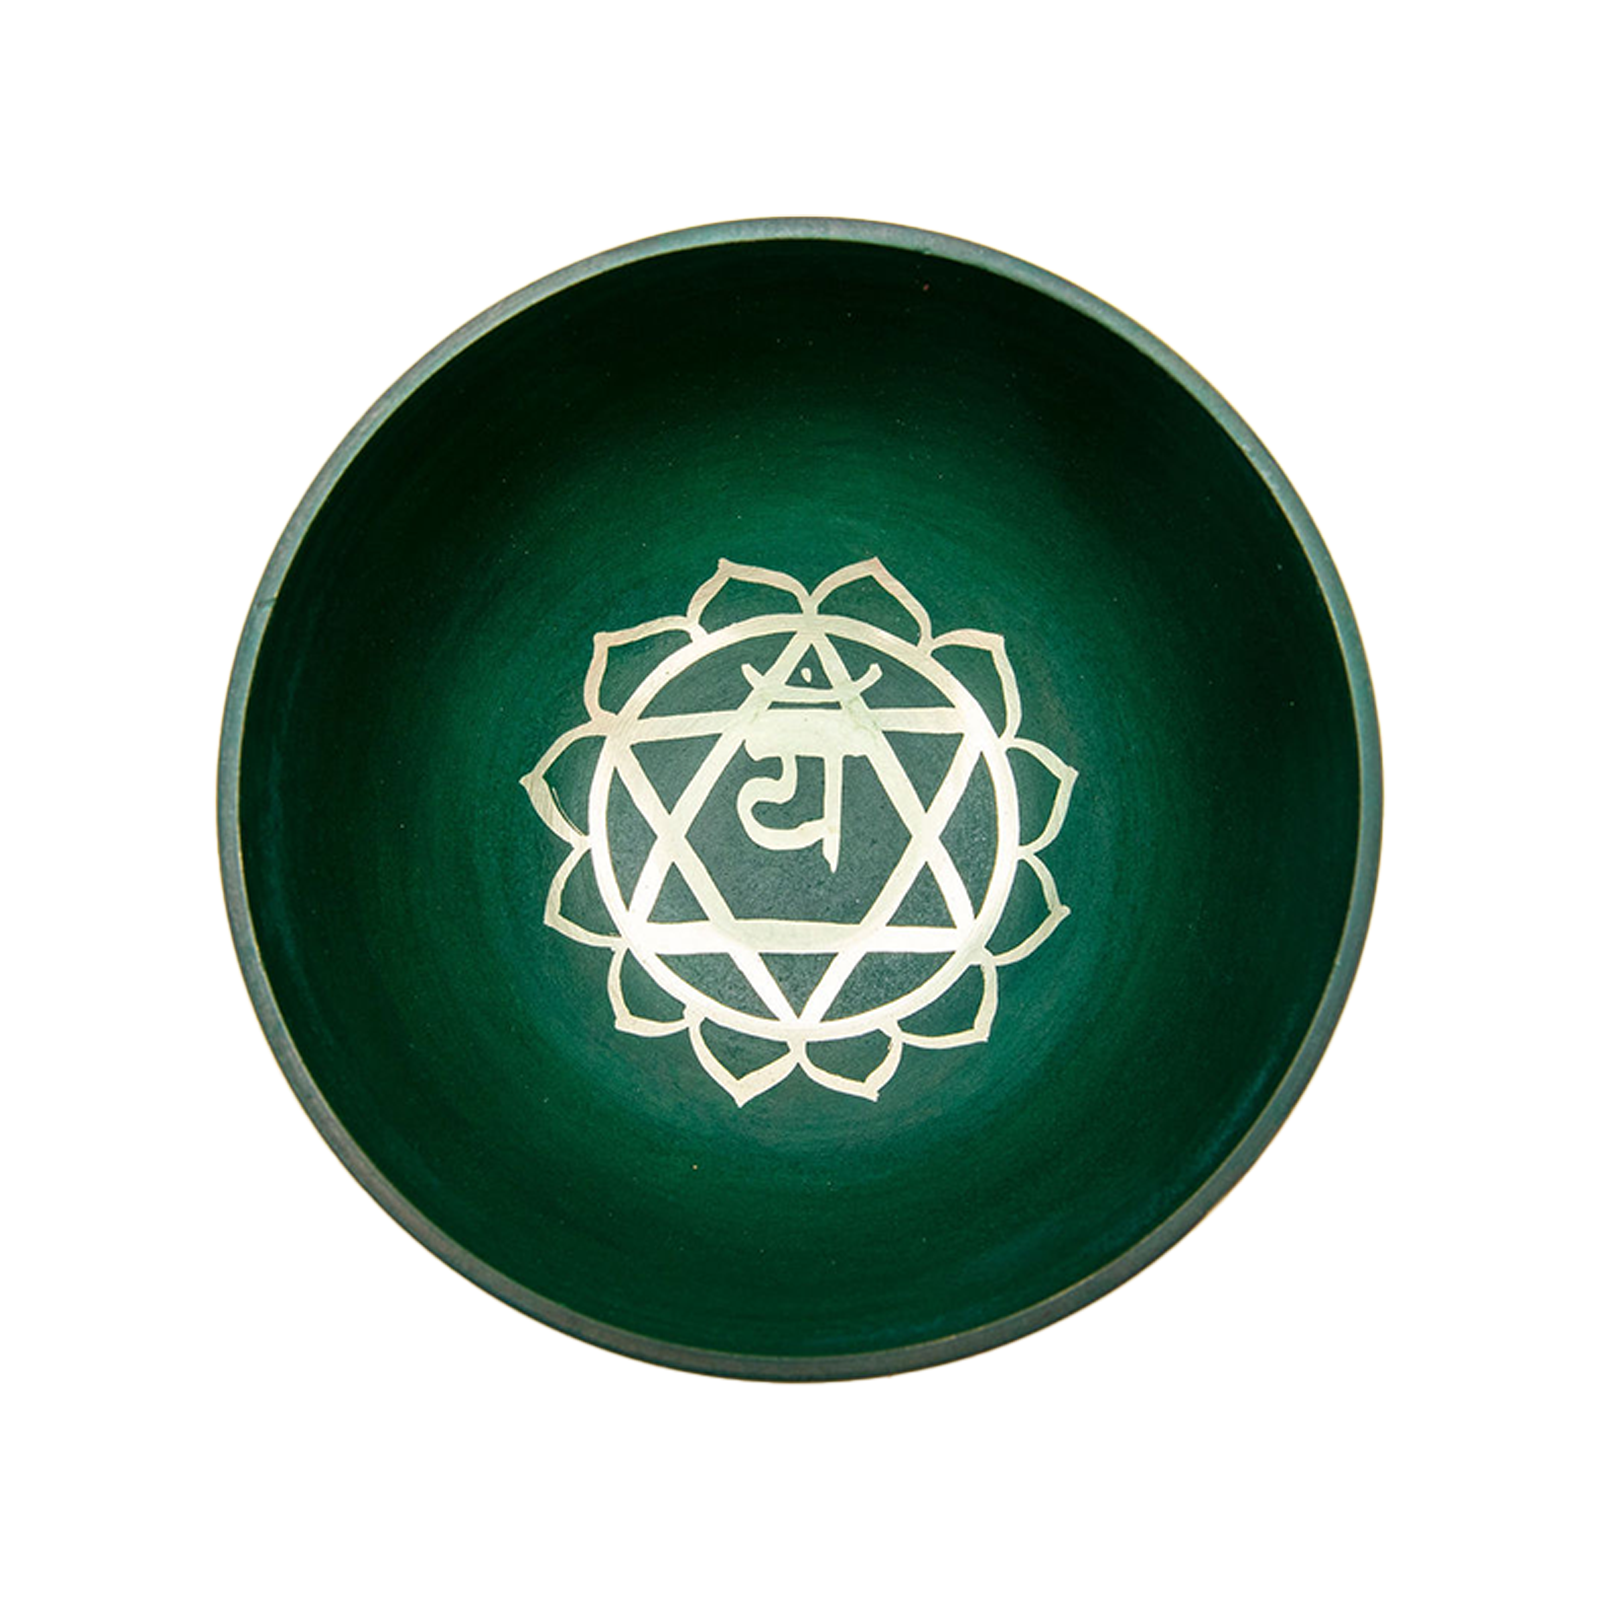 Inside view of the green chakra (heart chakra) bowl on a white backdrop.